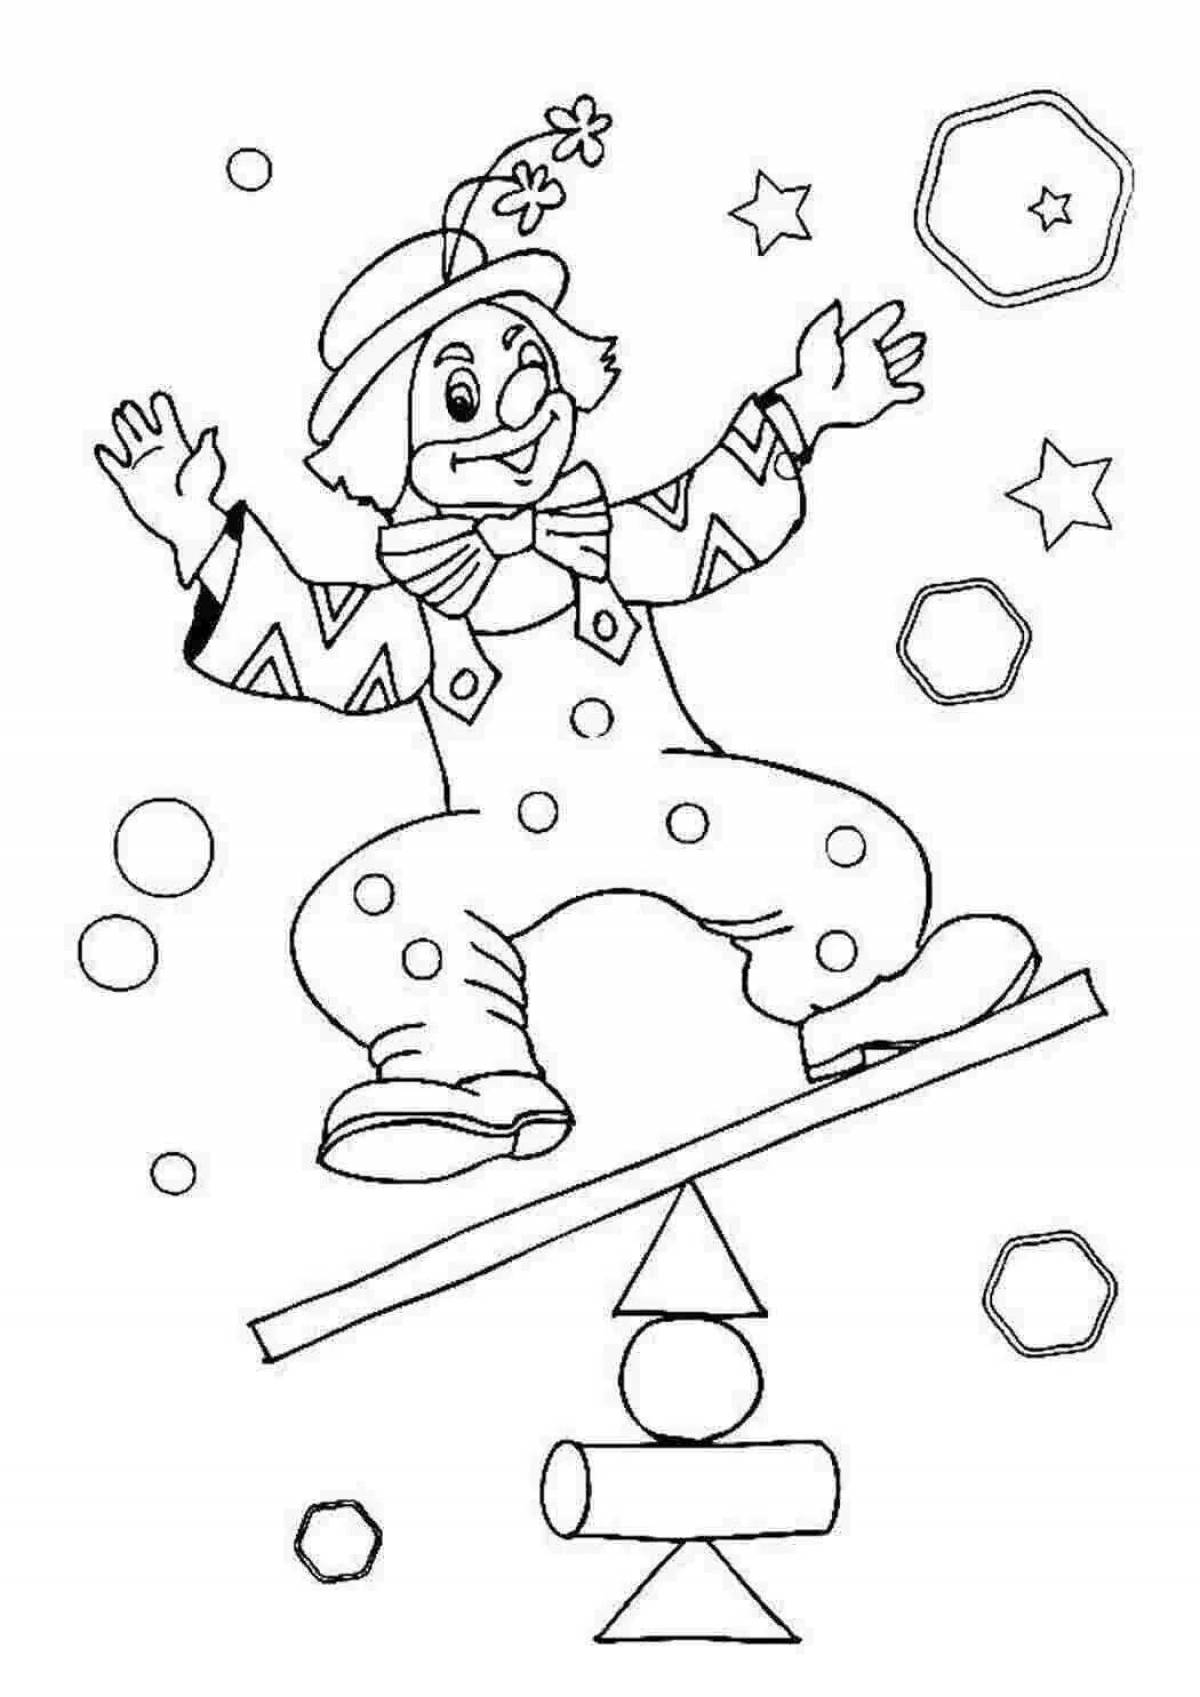 Fabulous circus coloring book for 4-5 year olds